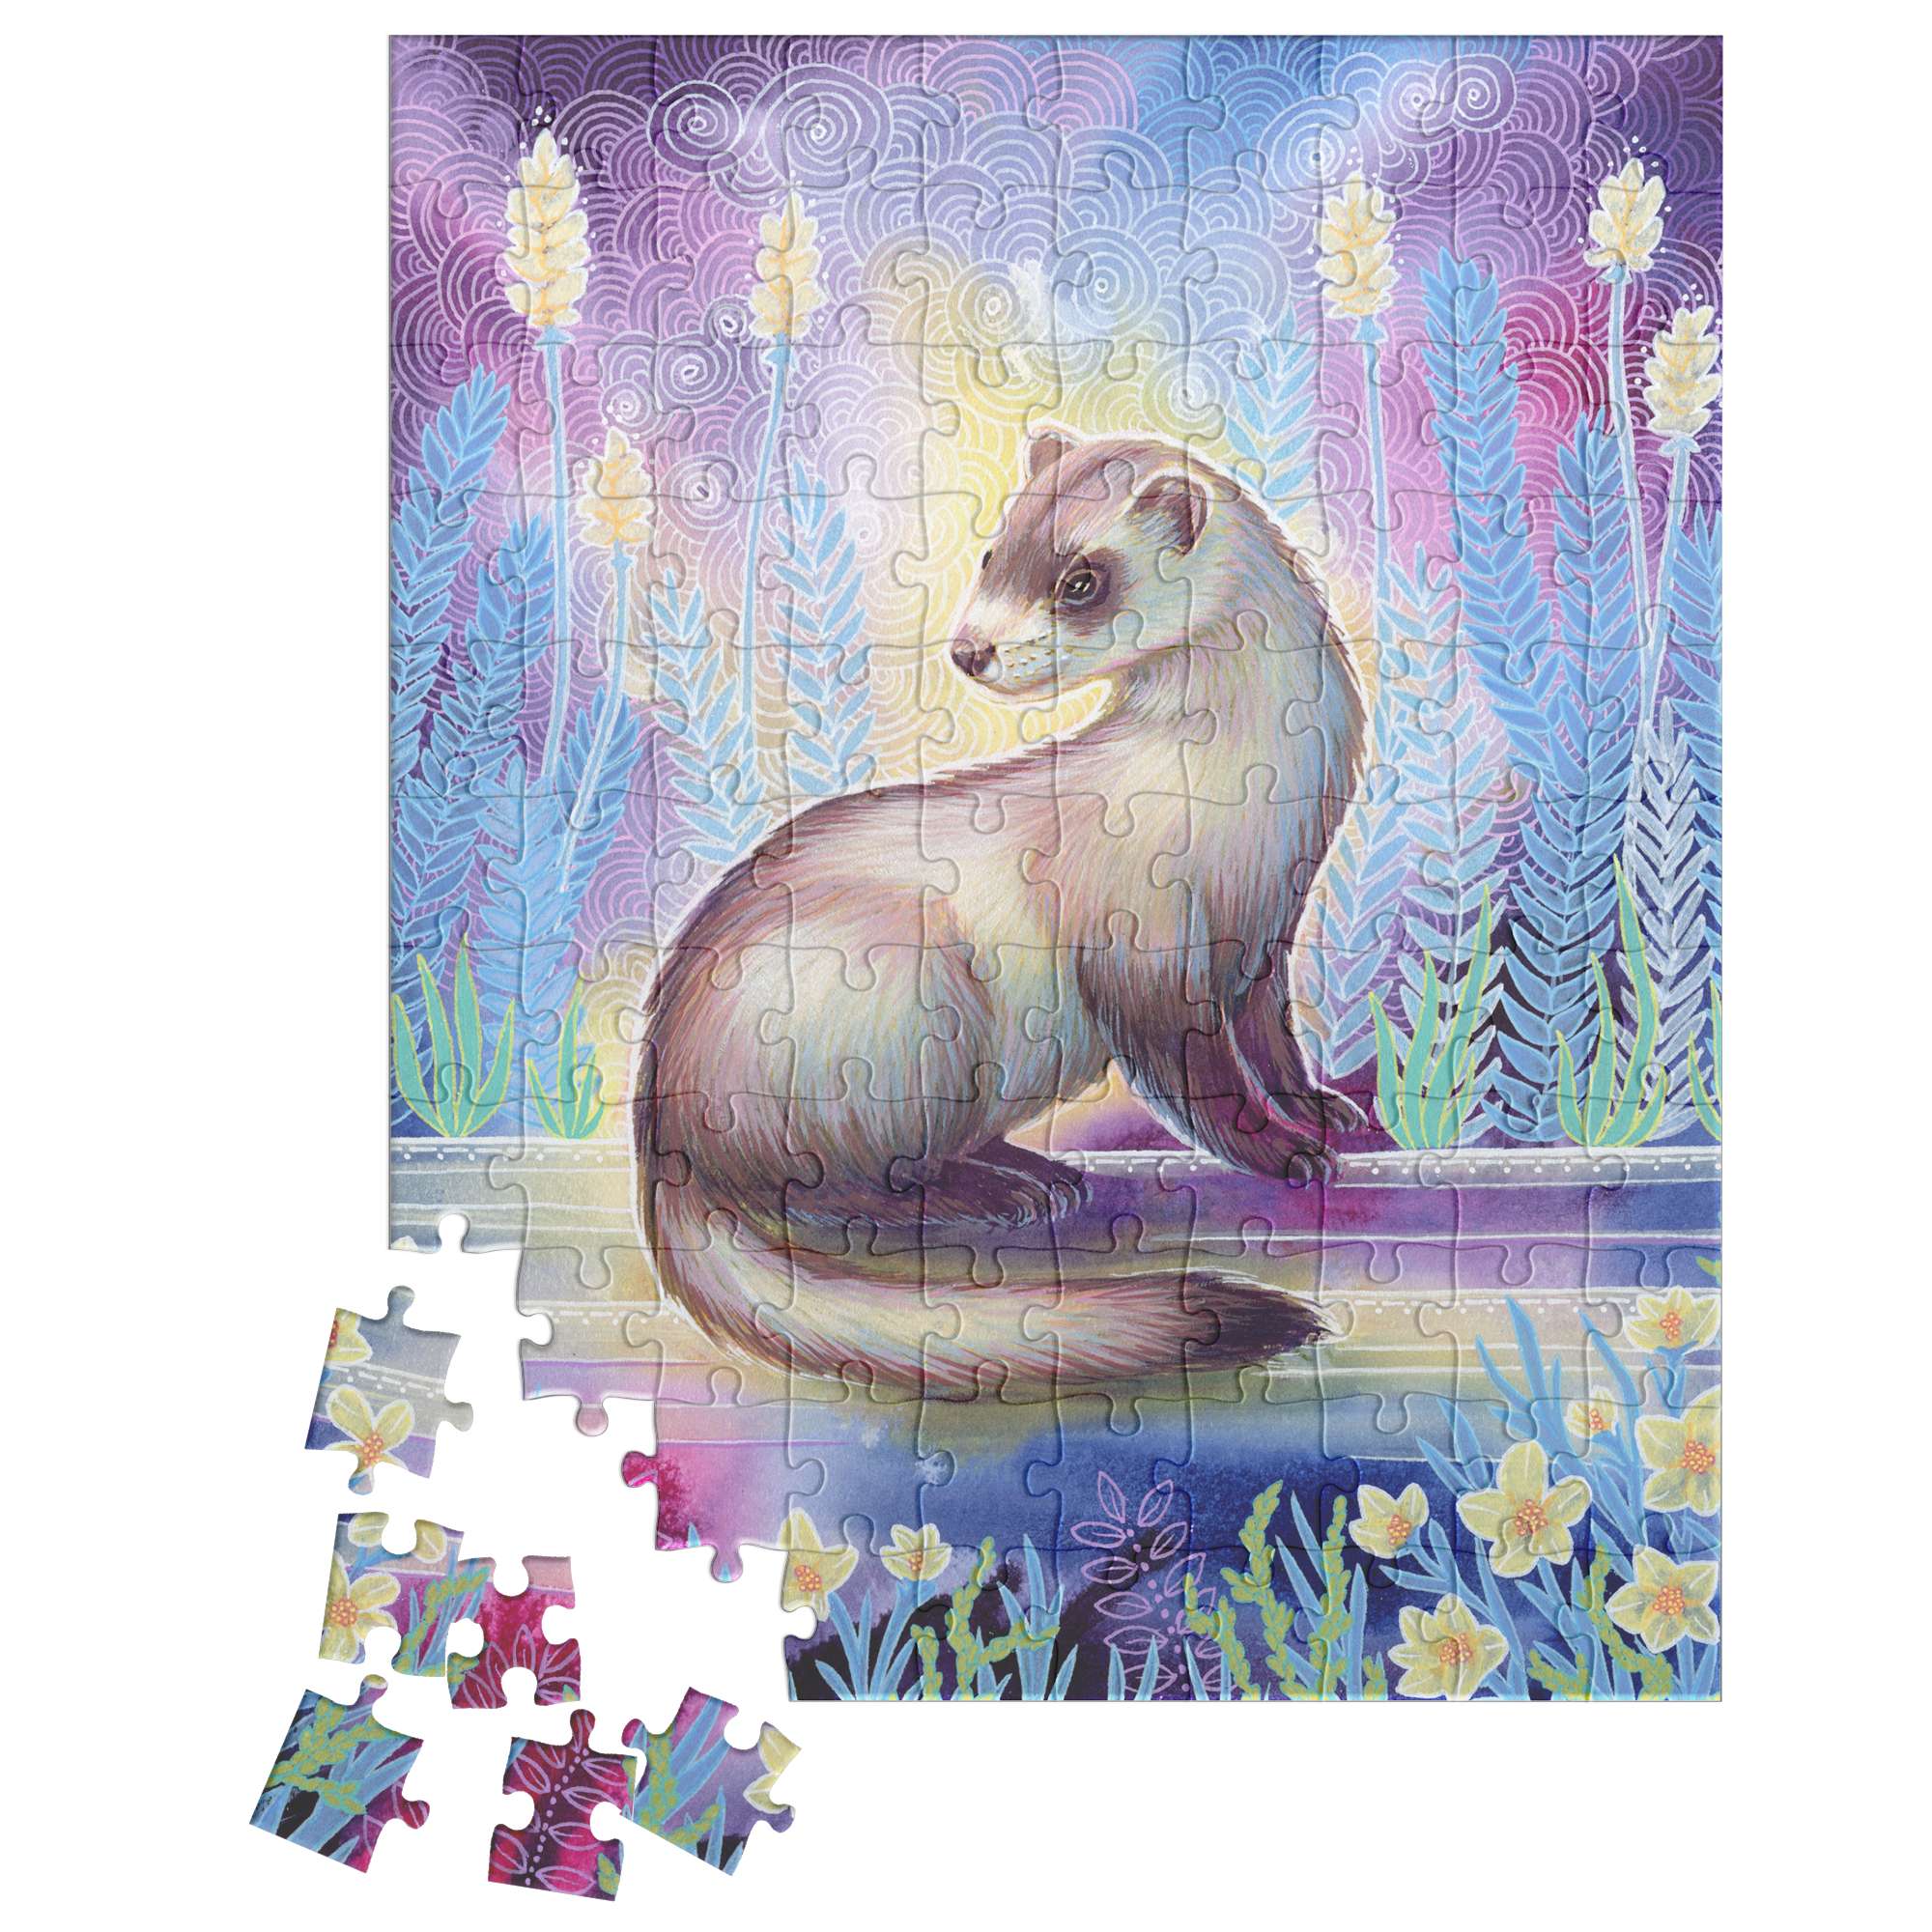 A nearly completed Ferret Puzzle depicting a ferret sitting in a colorful garden with a few pieces scattered at the bottom.